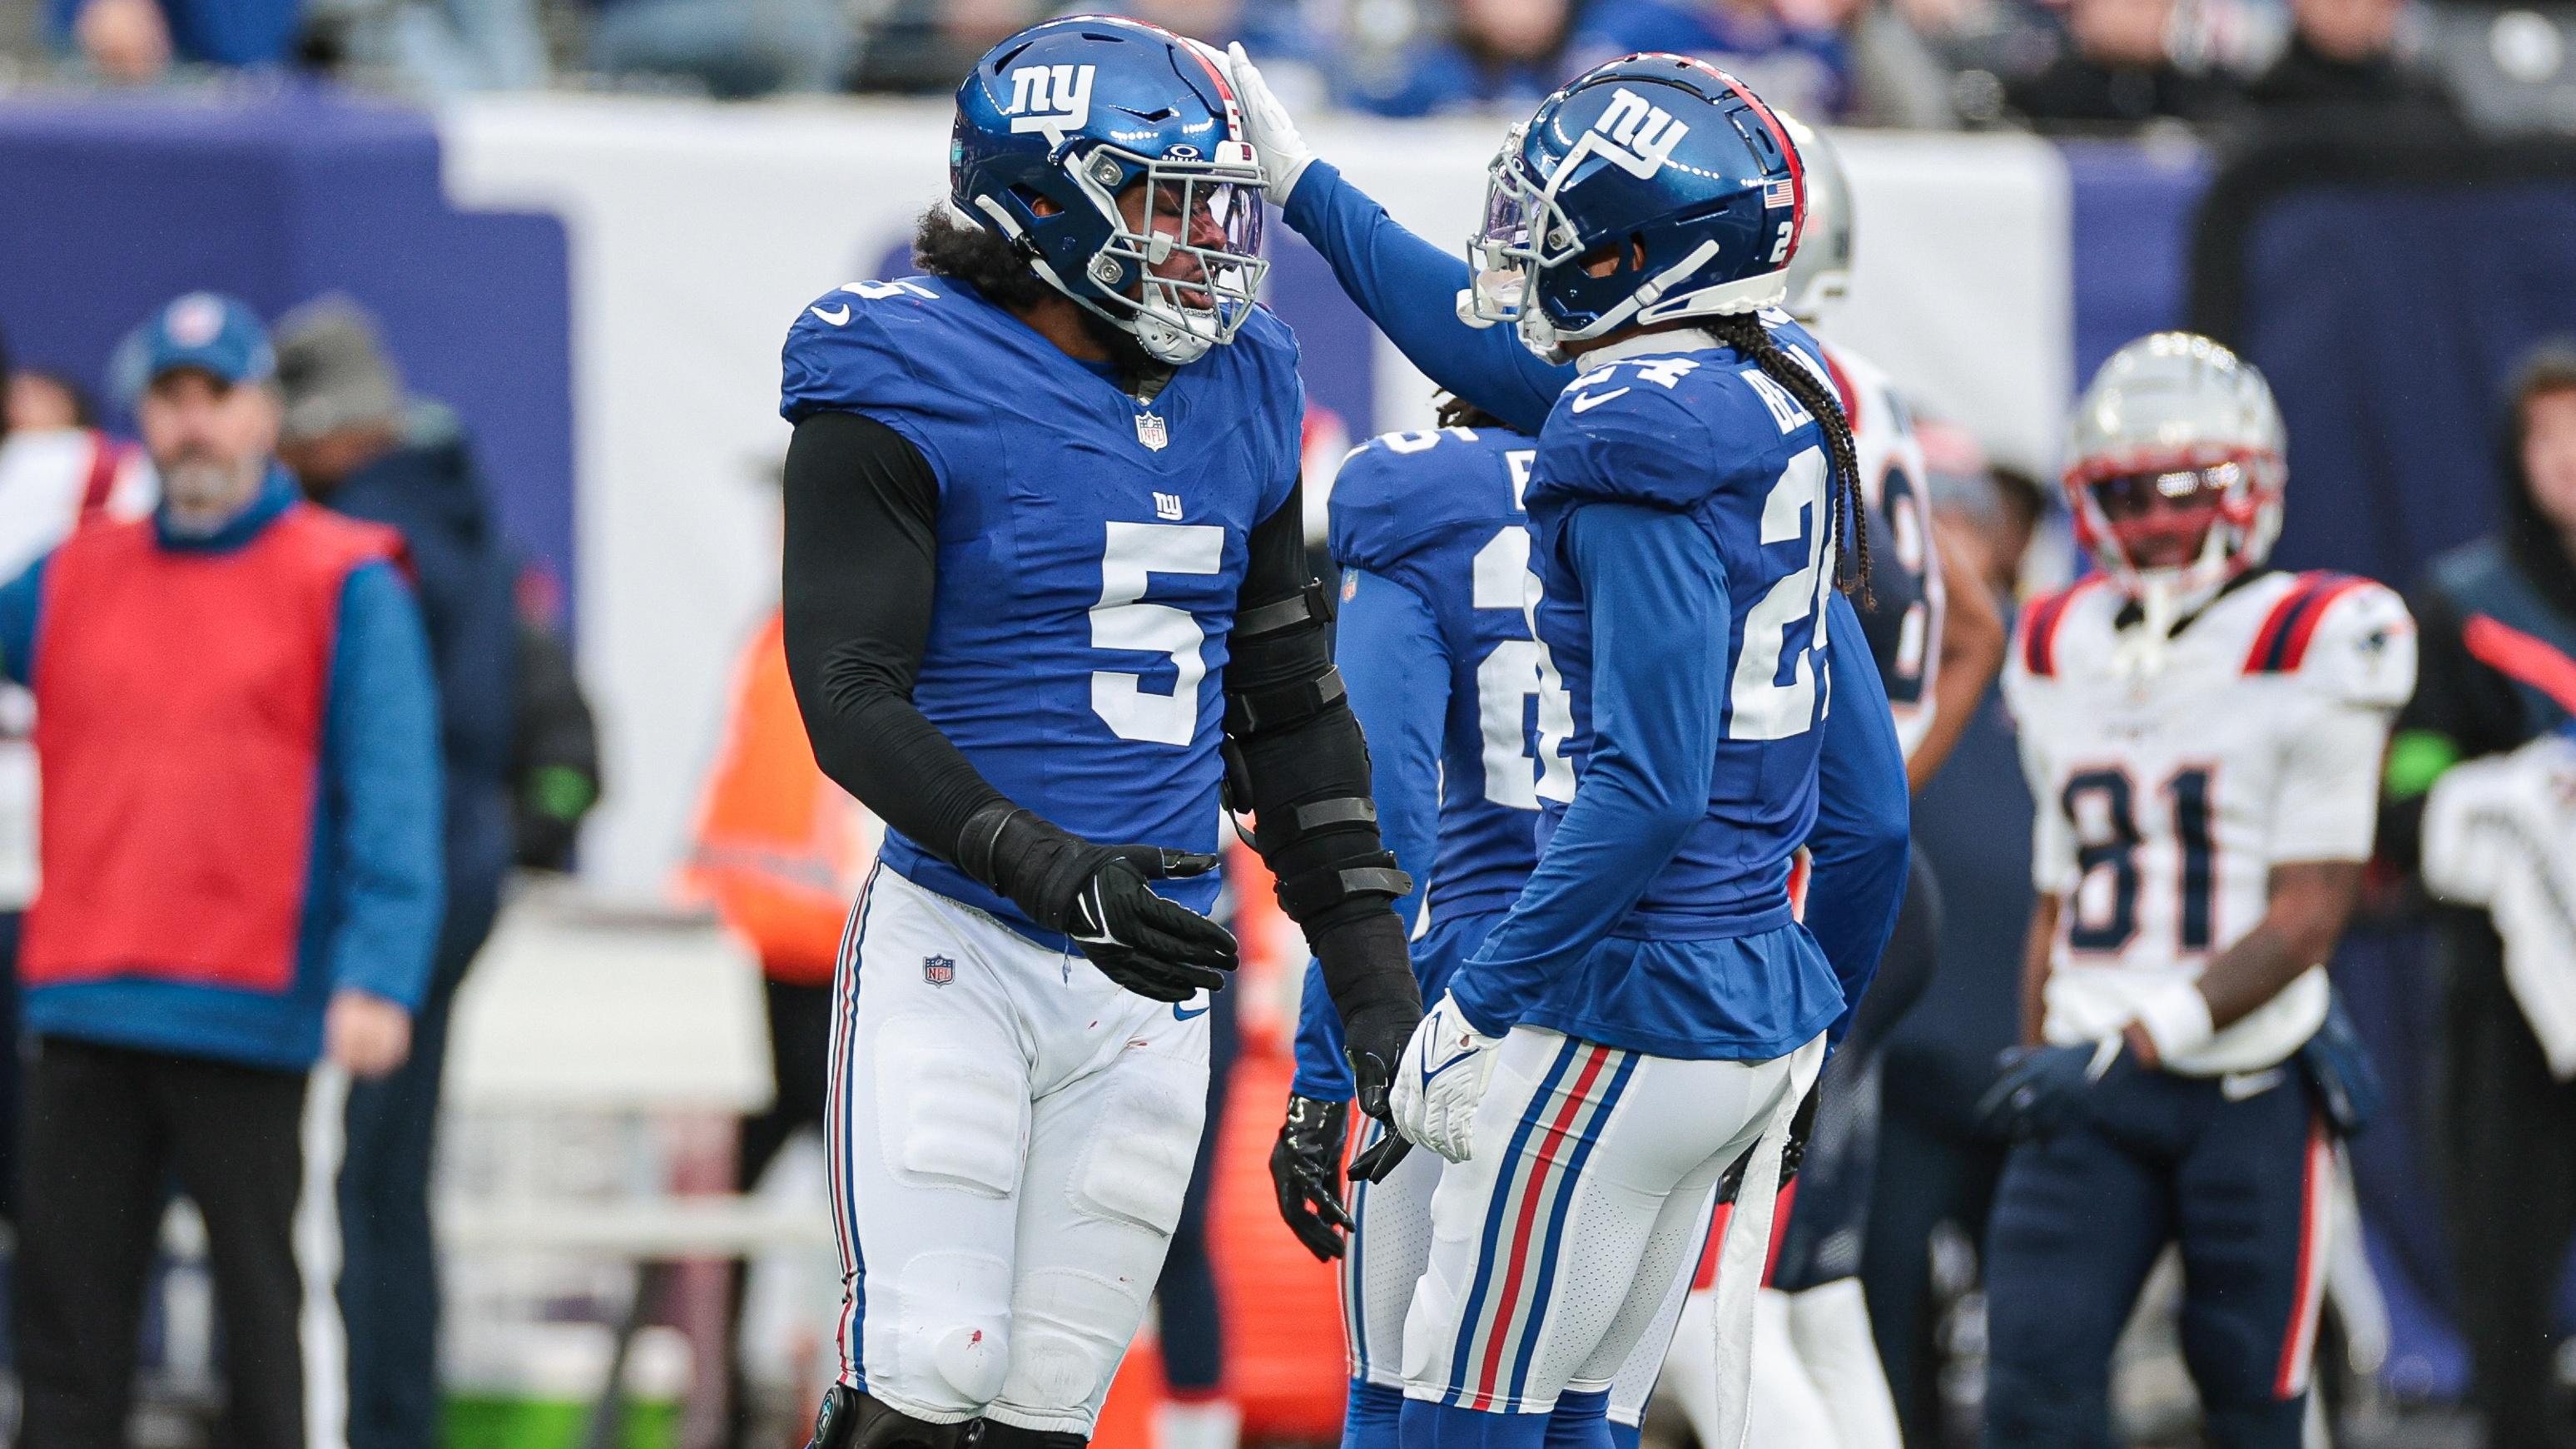 New York Giants linebacker Kayvon Thibodeaux (5) celebrates a defensive stop with safety Dane Belton (24) during the first half against the New England Patriots at MetLife Stadium / Vincent Carchietta - USA TODAY Sports